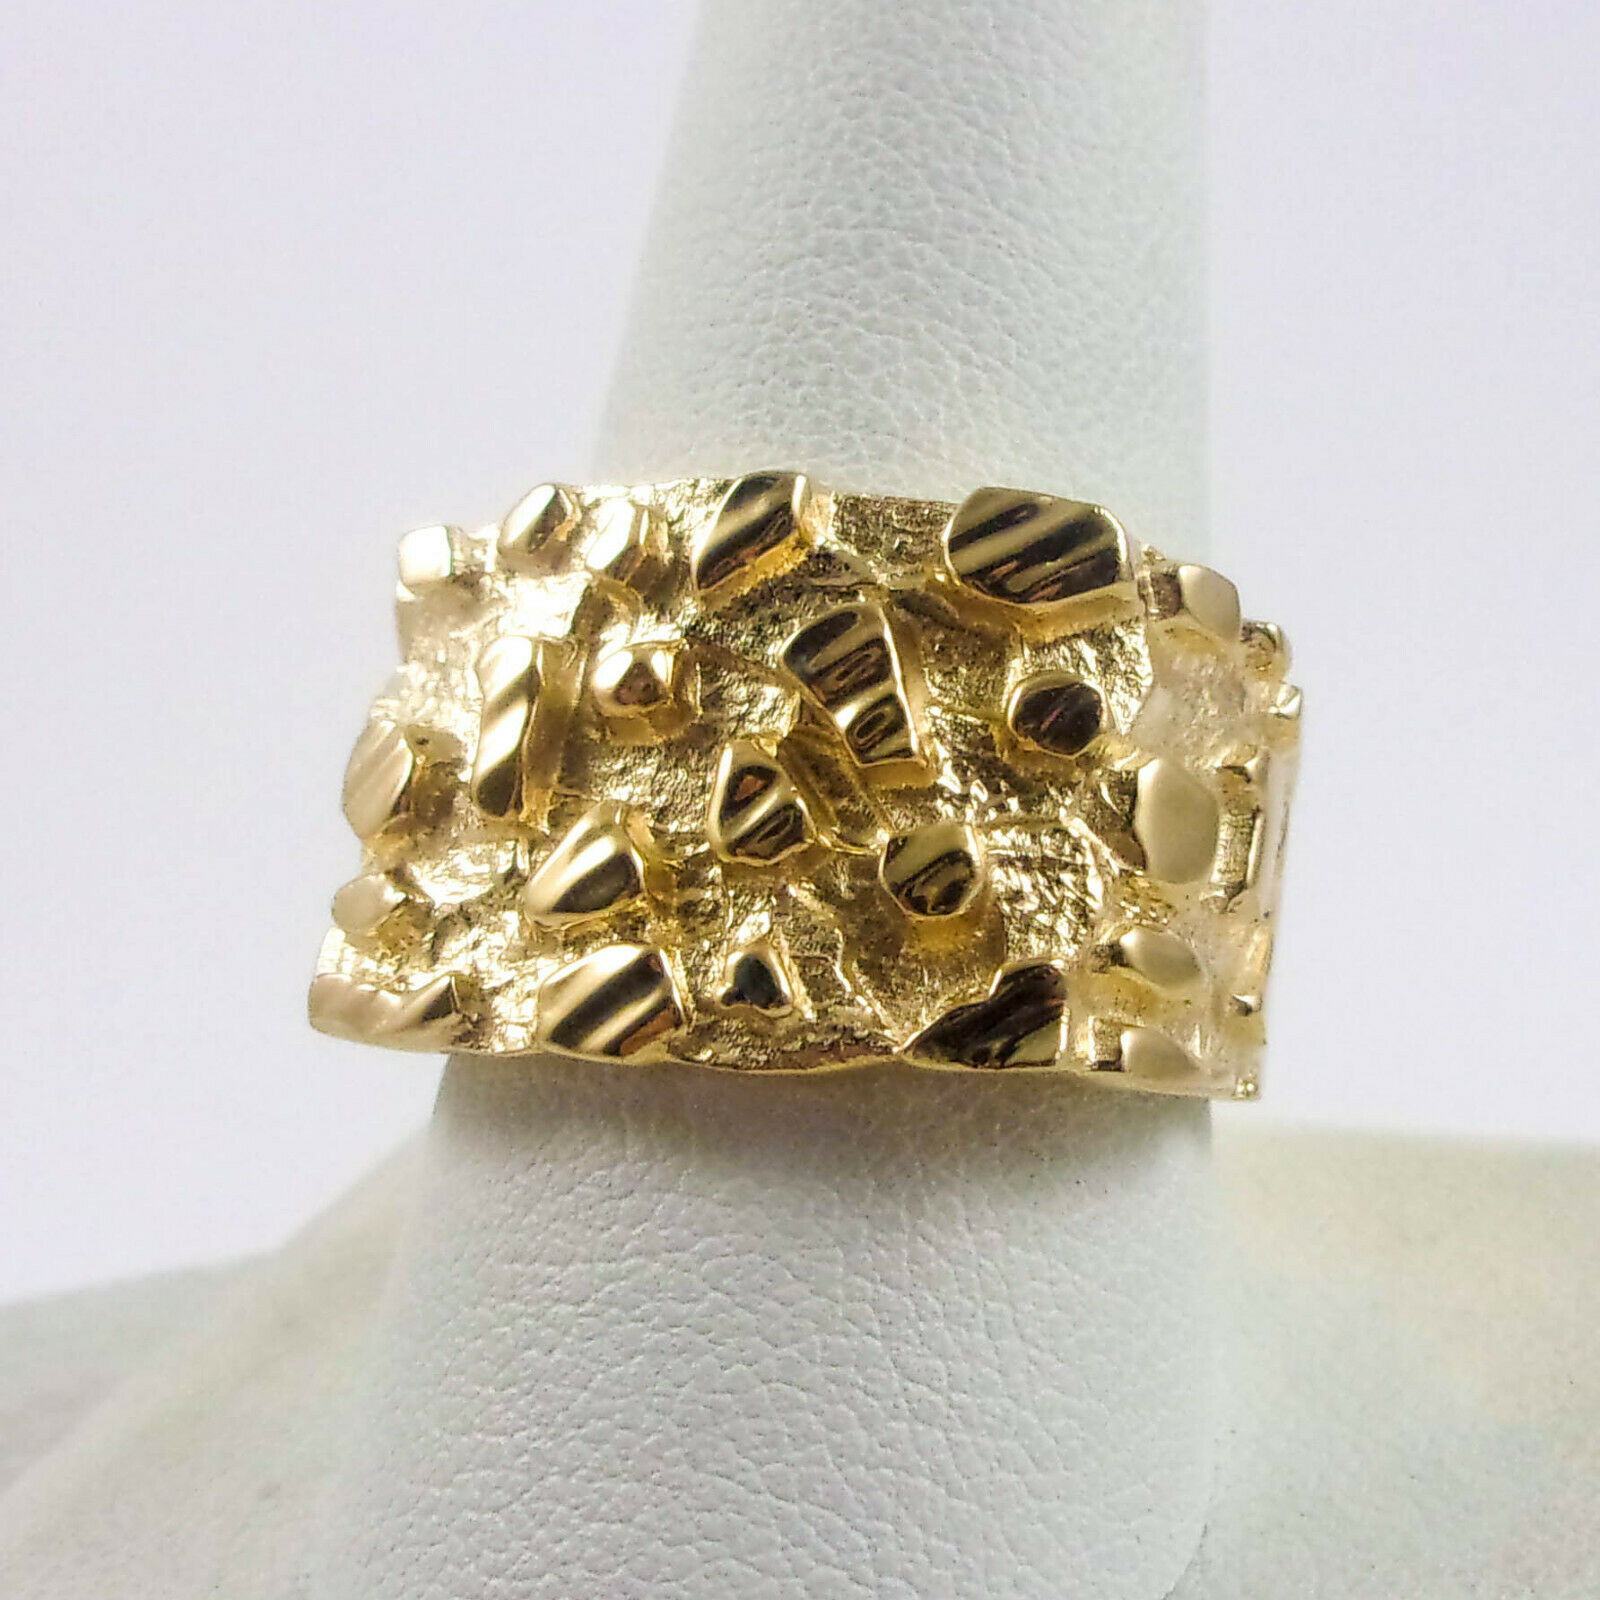 Solid 14K Yellow Gold Mens Nugget Ring Diamond Cut Heavy Wide Face